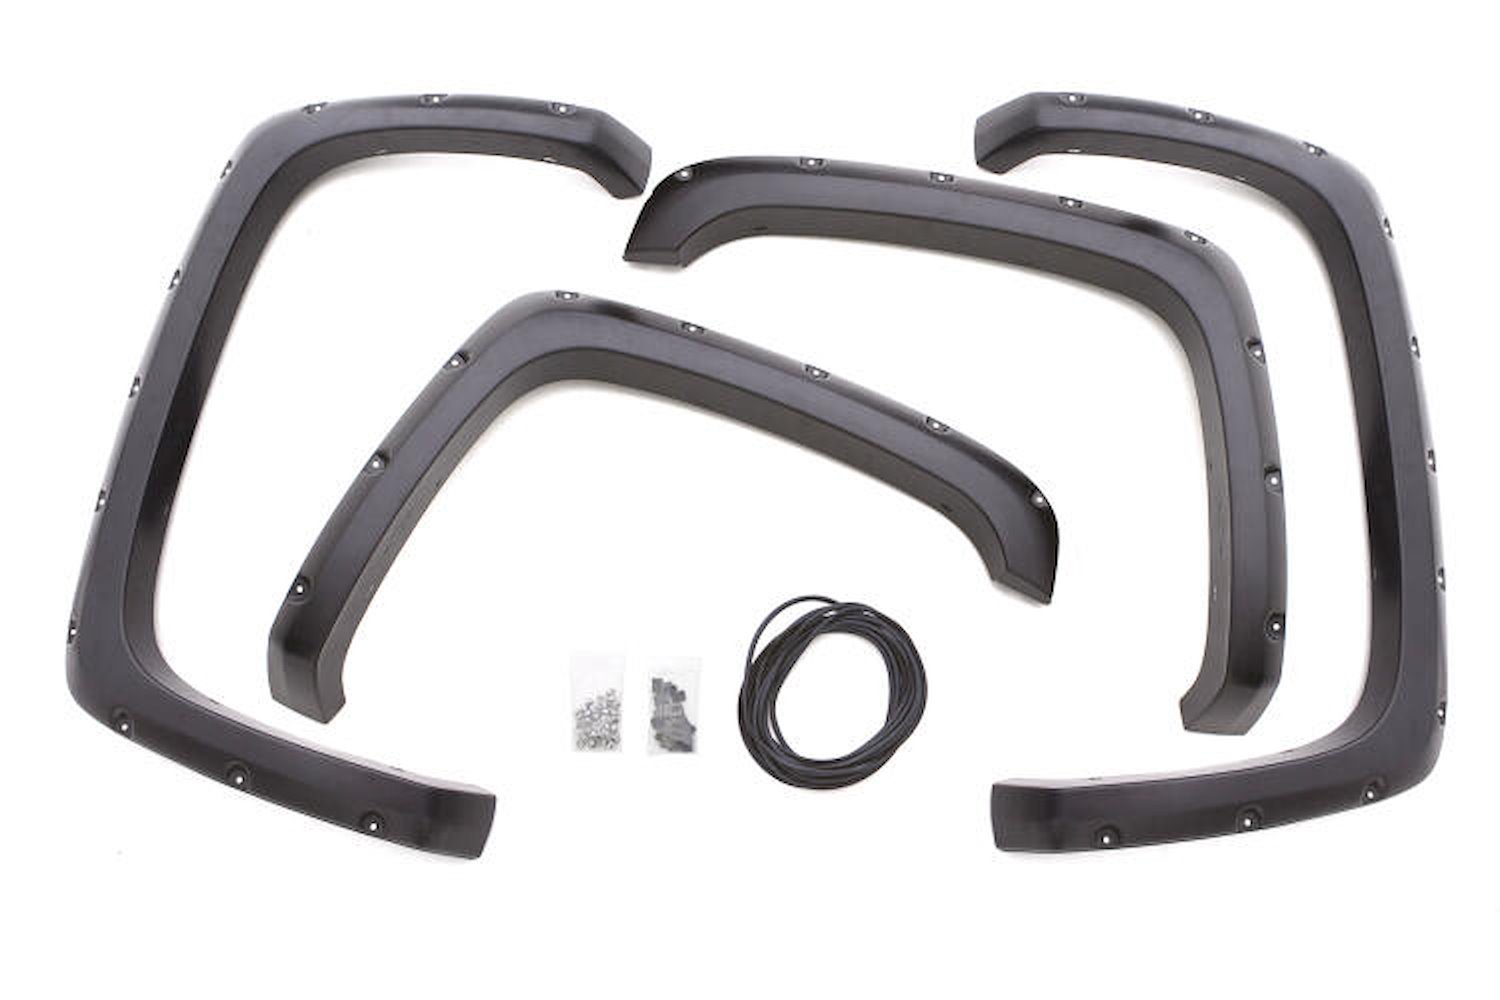 RX Rivet-Style Front/Rear Fender Flares For Select Late-Model GMC Sierra 1500 Trucks [Smooth Finish]